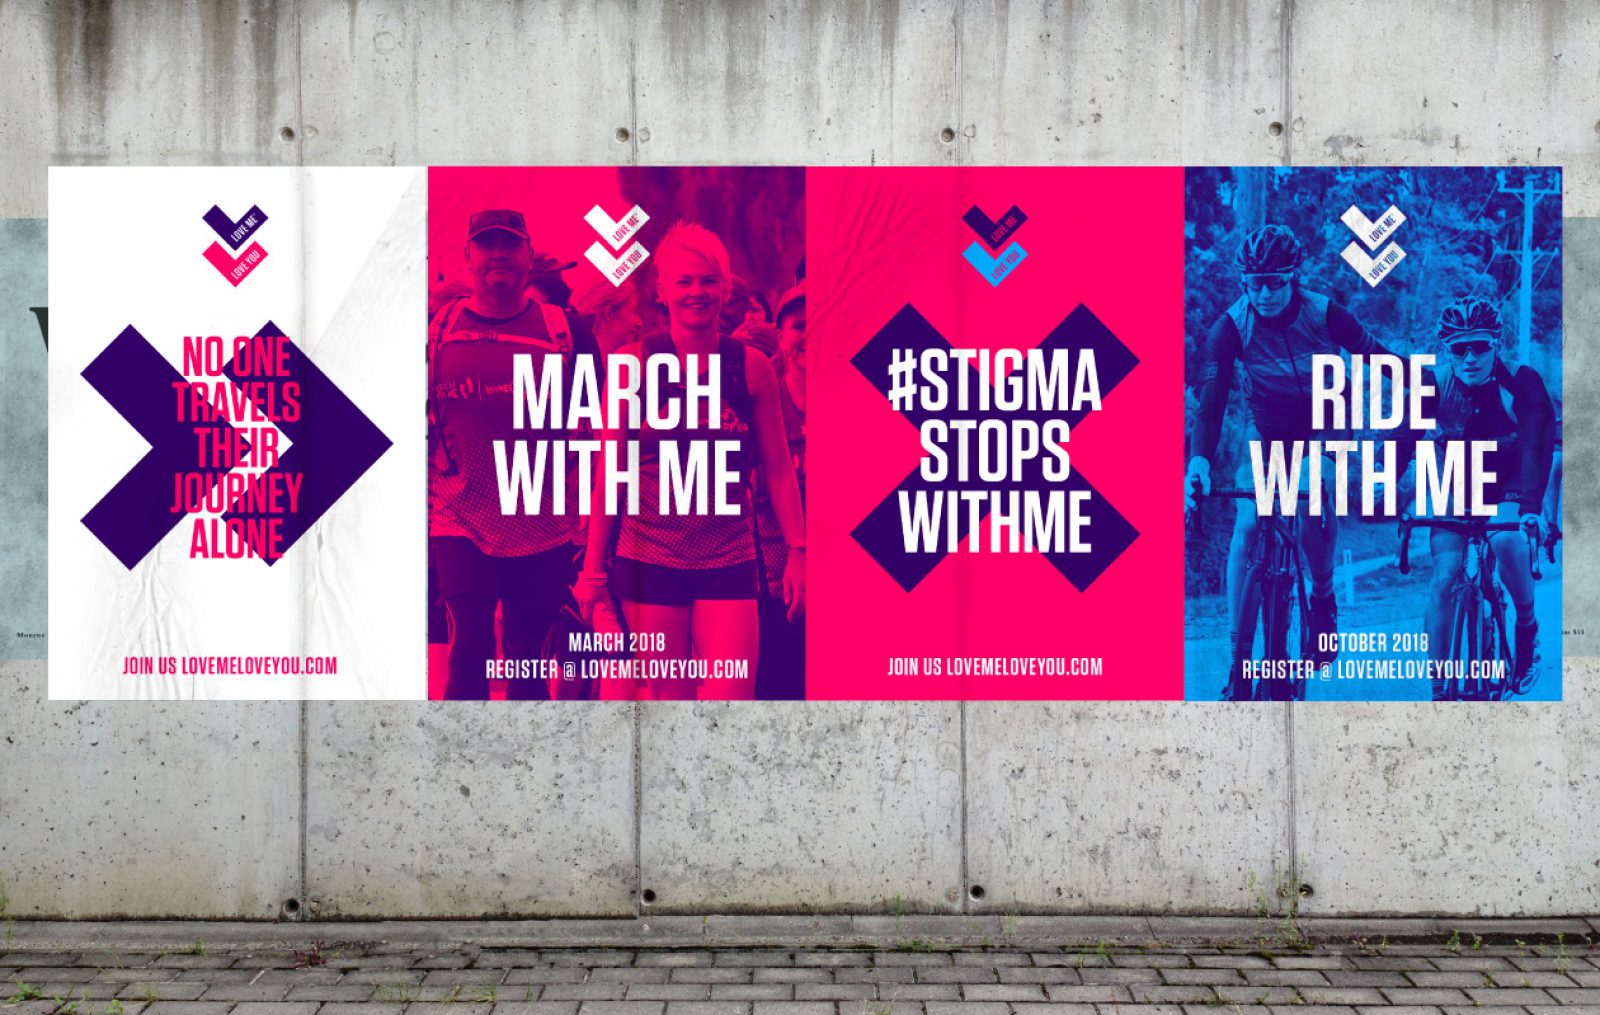 Love Me Love You campaign posters in a street environment with duotone images, logo and call to action.